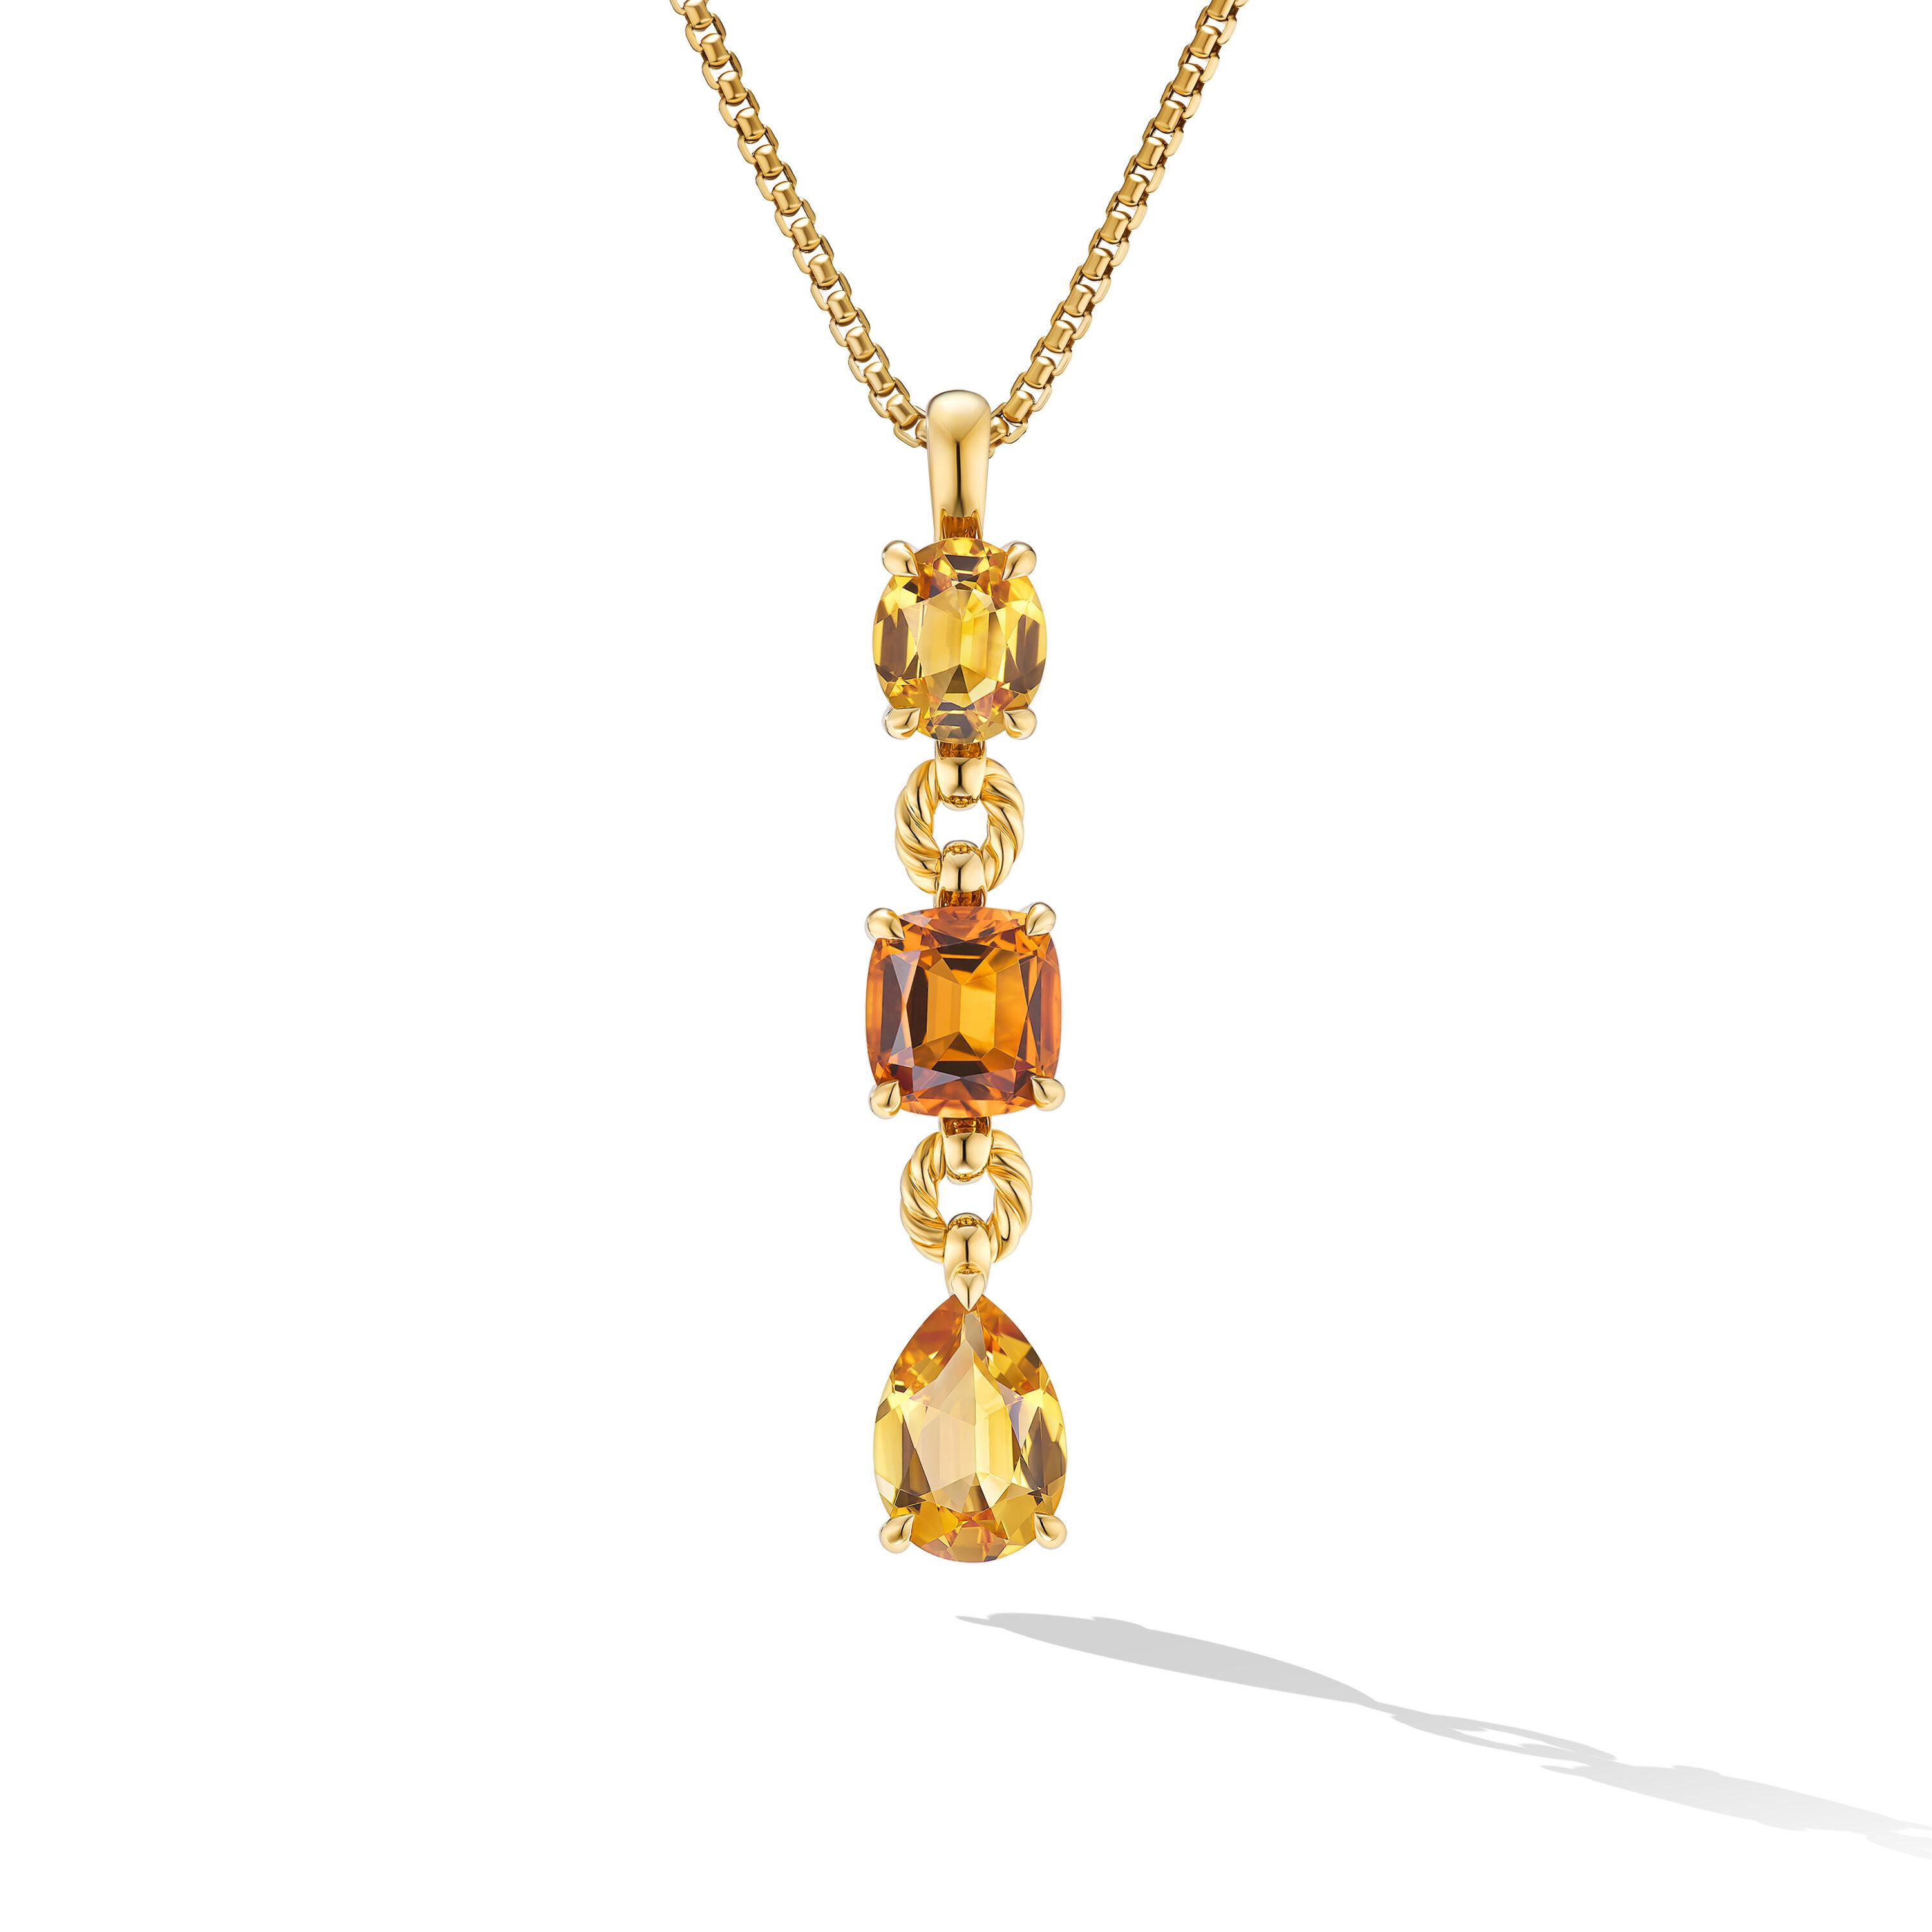 David Yurman Marbella Y Pendant in 18K Yellow Gold with Citrine and Madeira Citrine